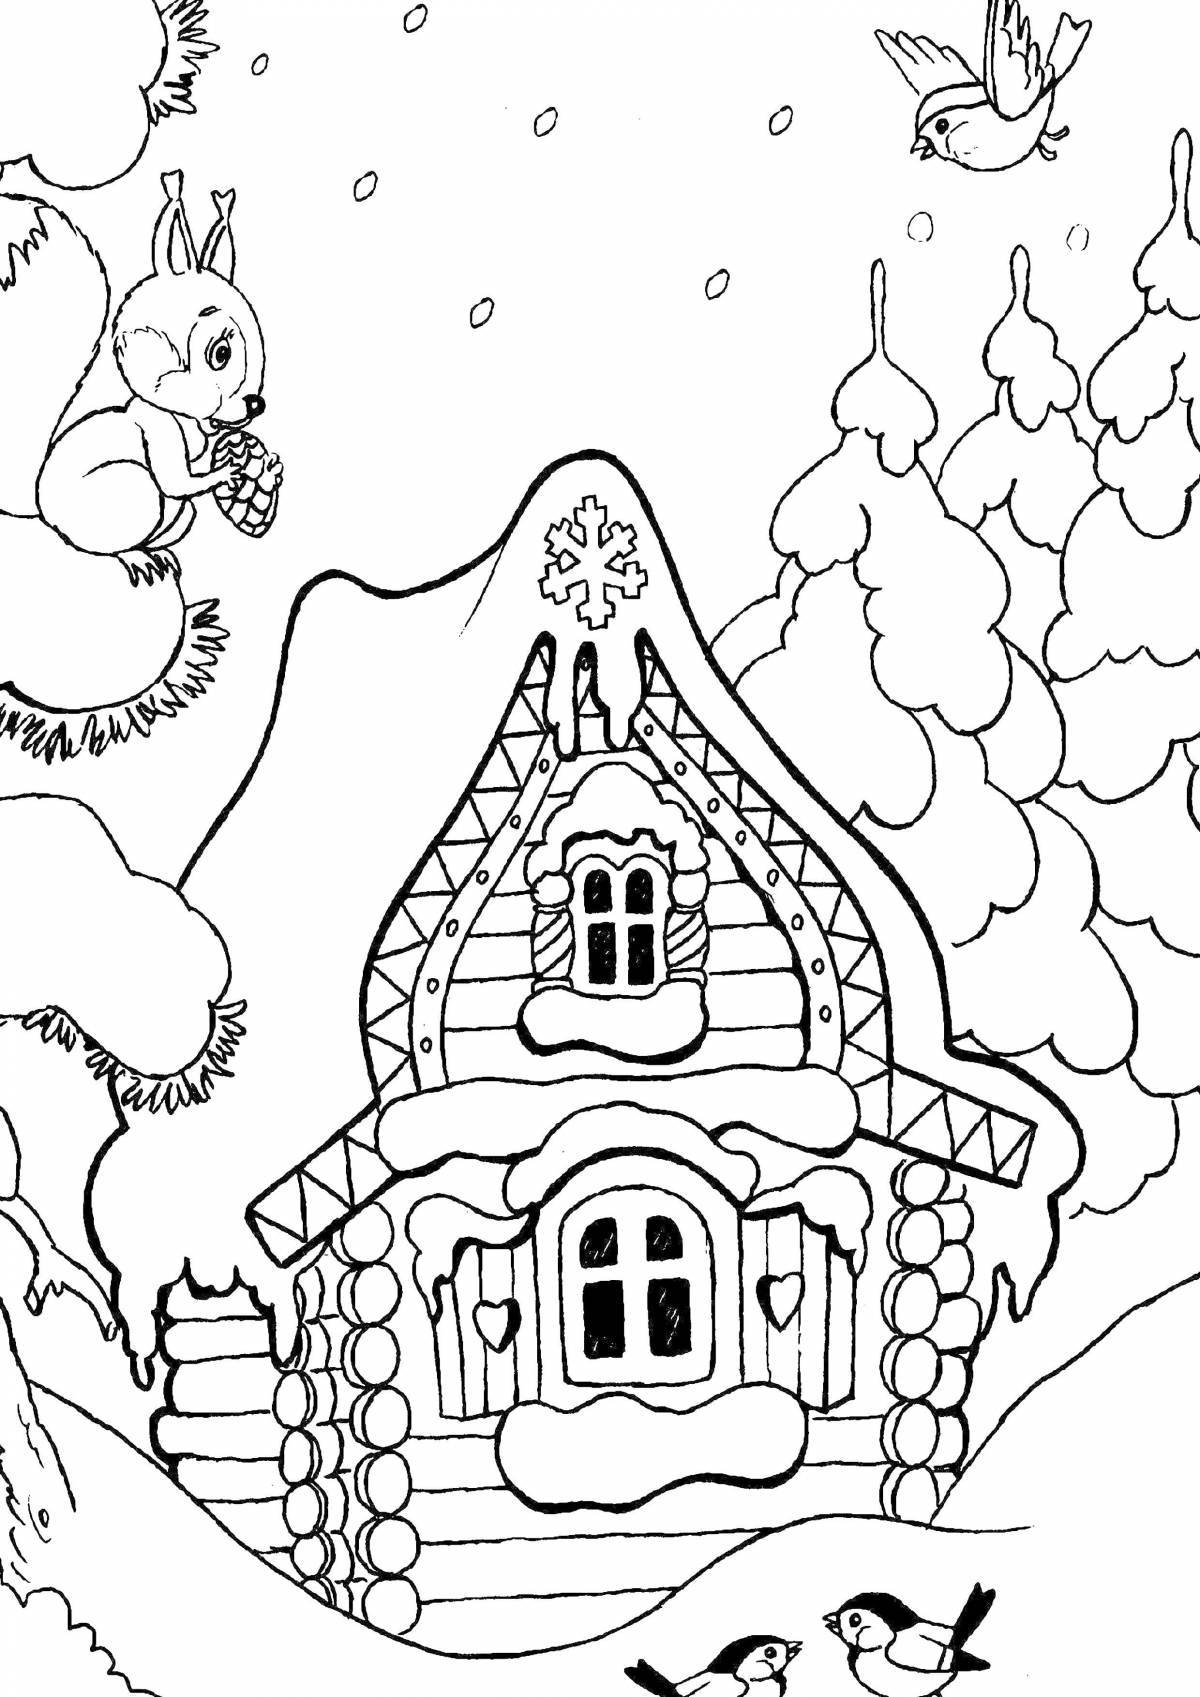 Merry winter forest coloring for kids